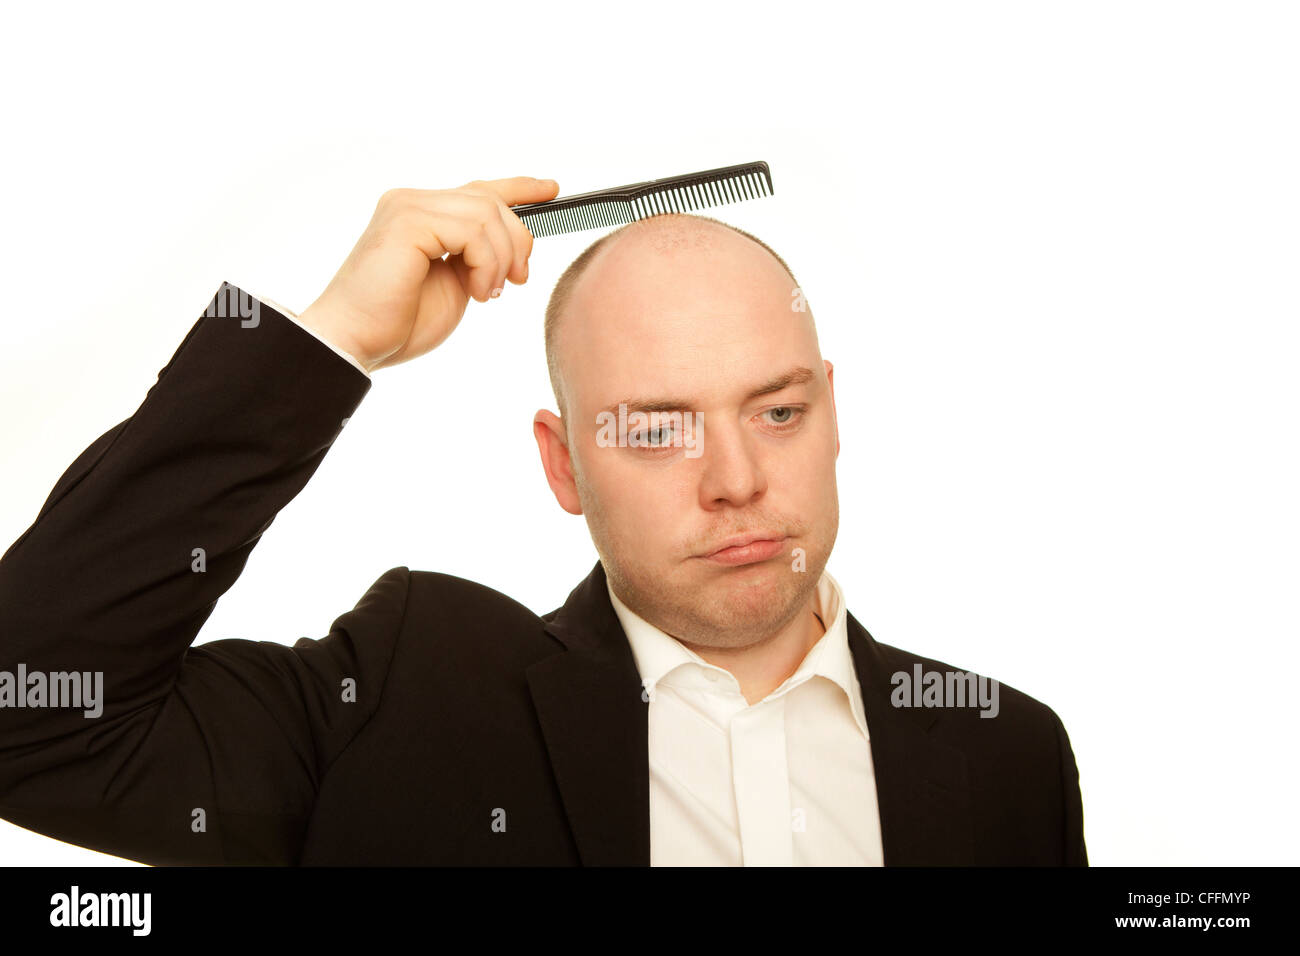 business man with comb is sad about hair loss Stock Photo